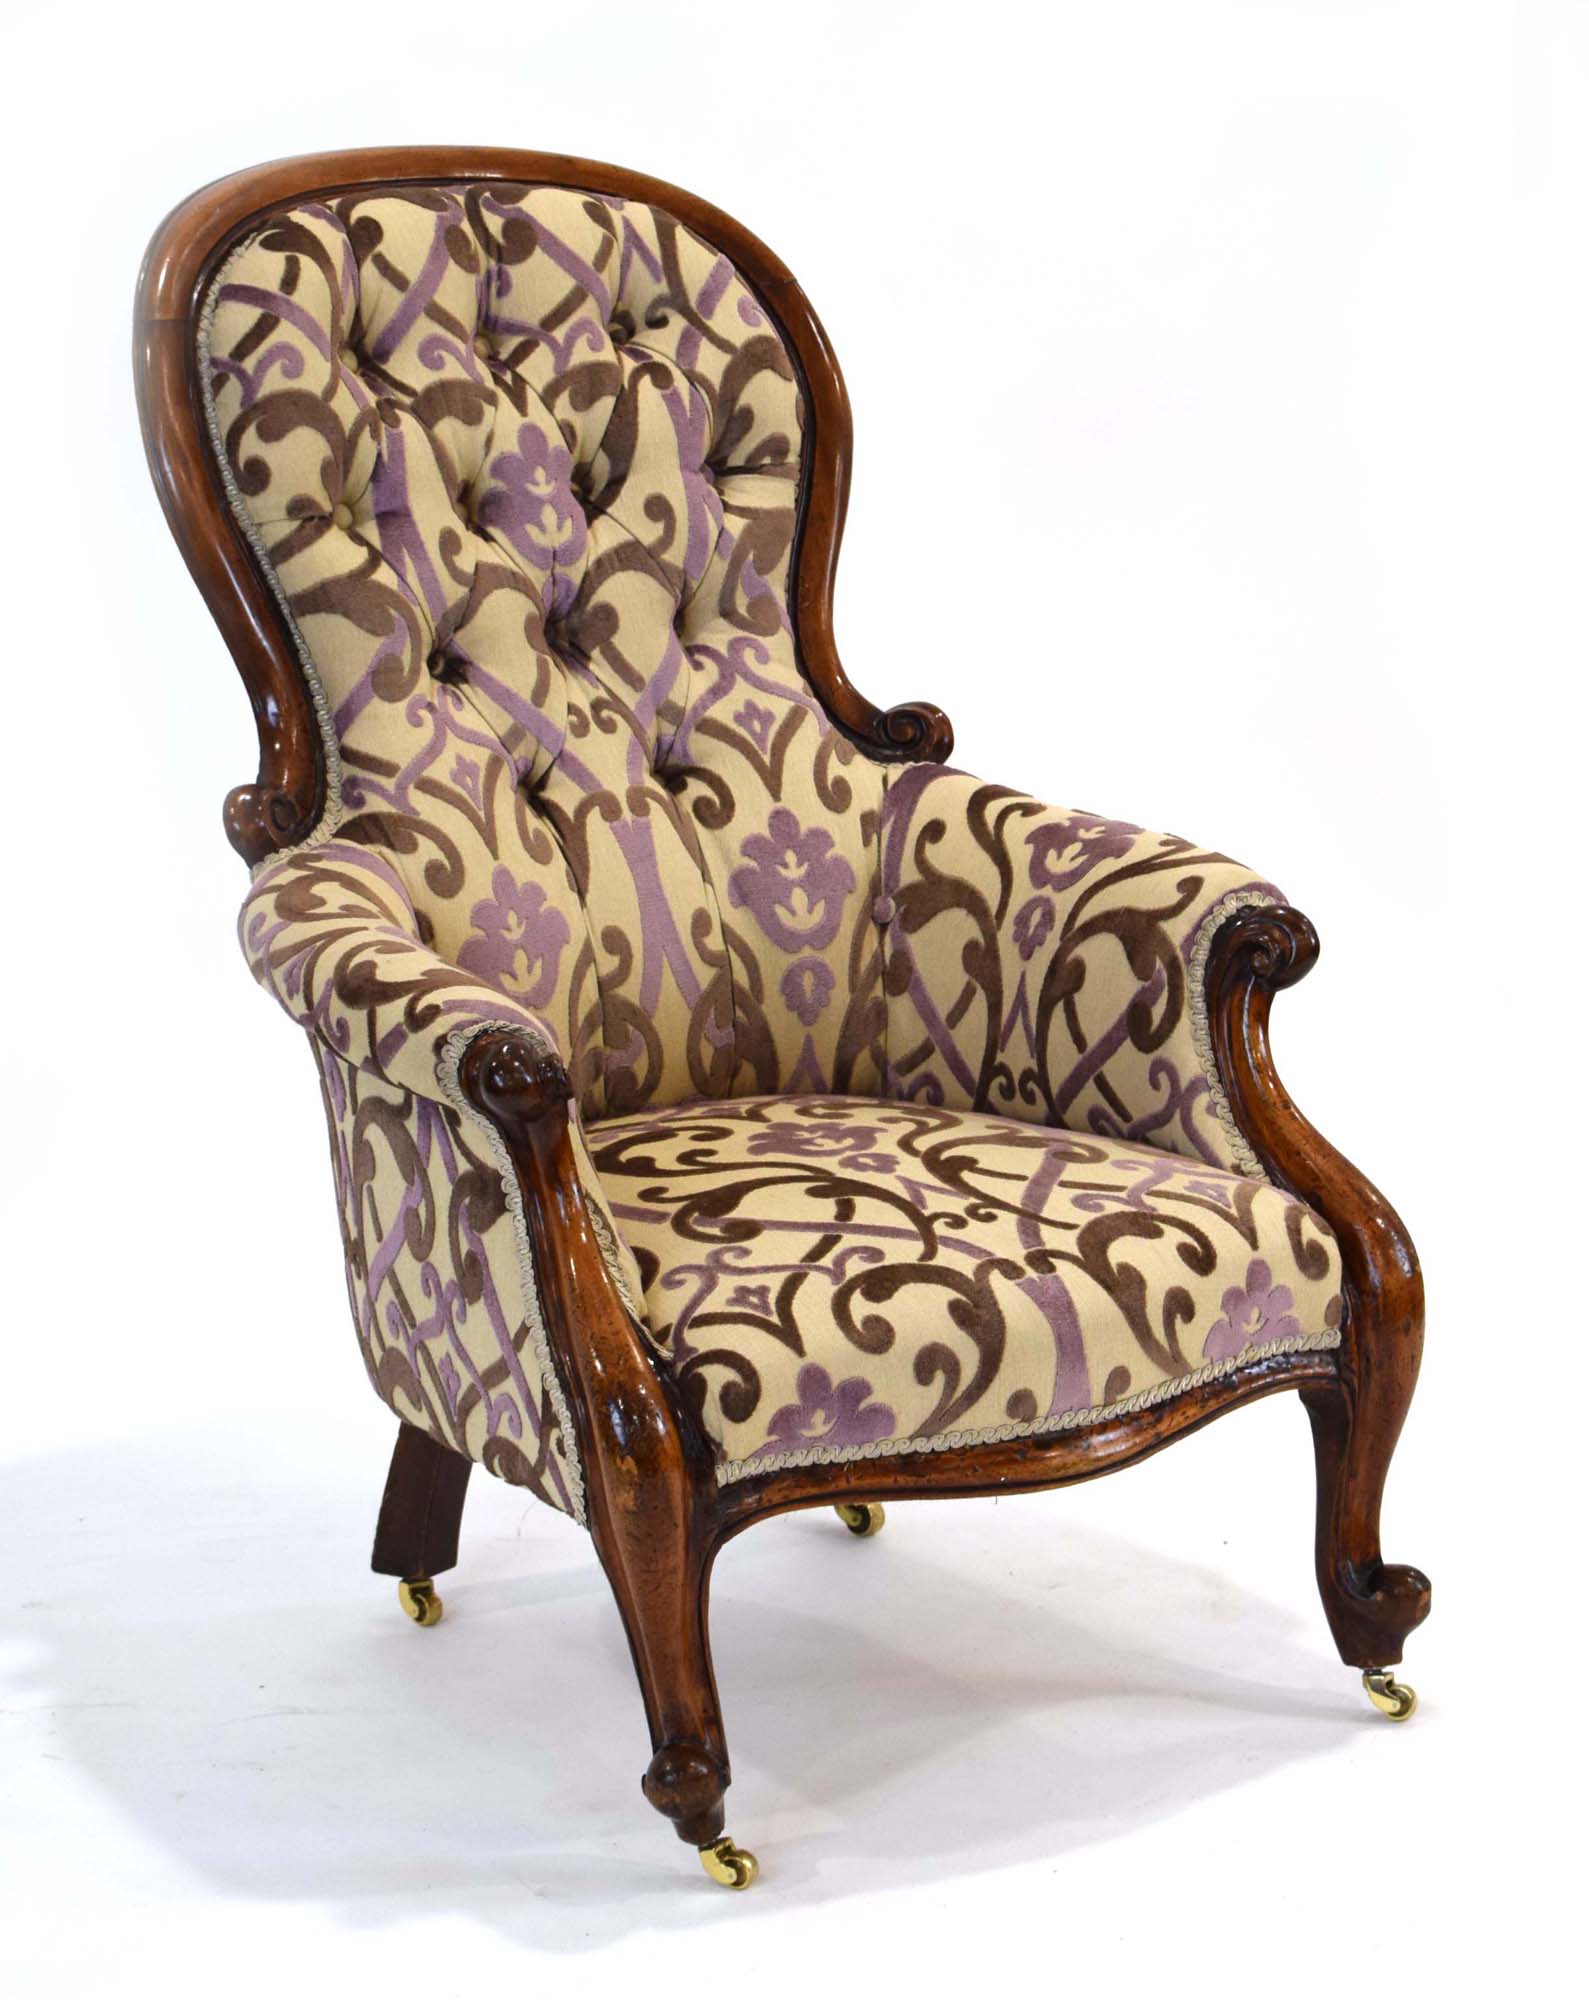 A Victorian mahogany and button upholstered armchair with scrolled front legs on castors - Image 2 of 2